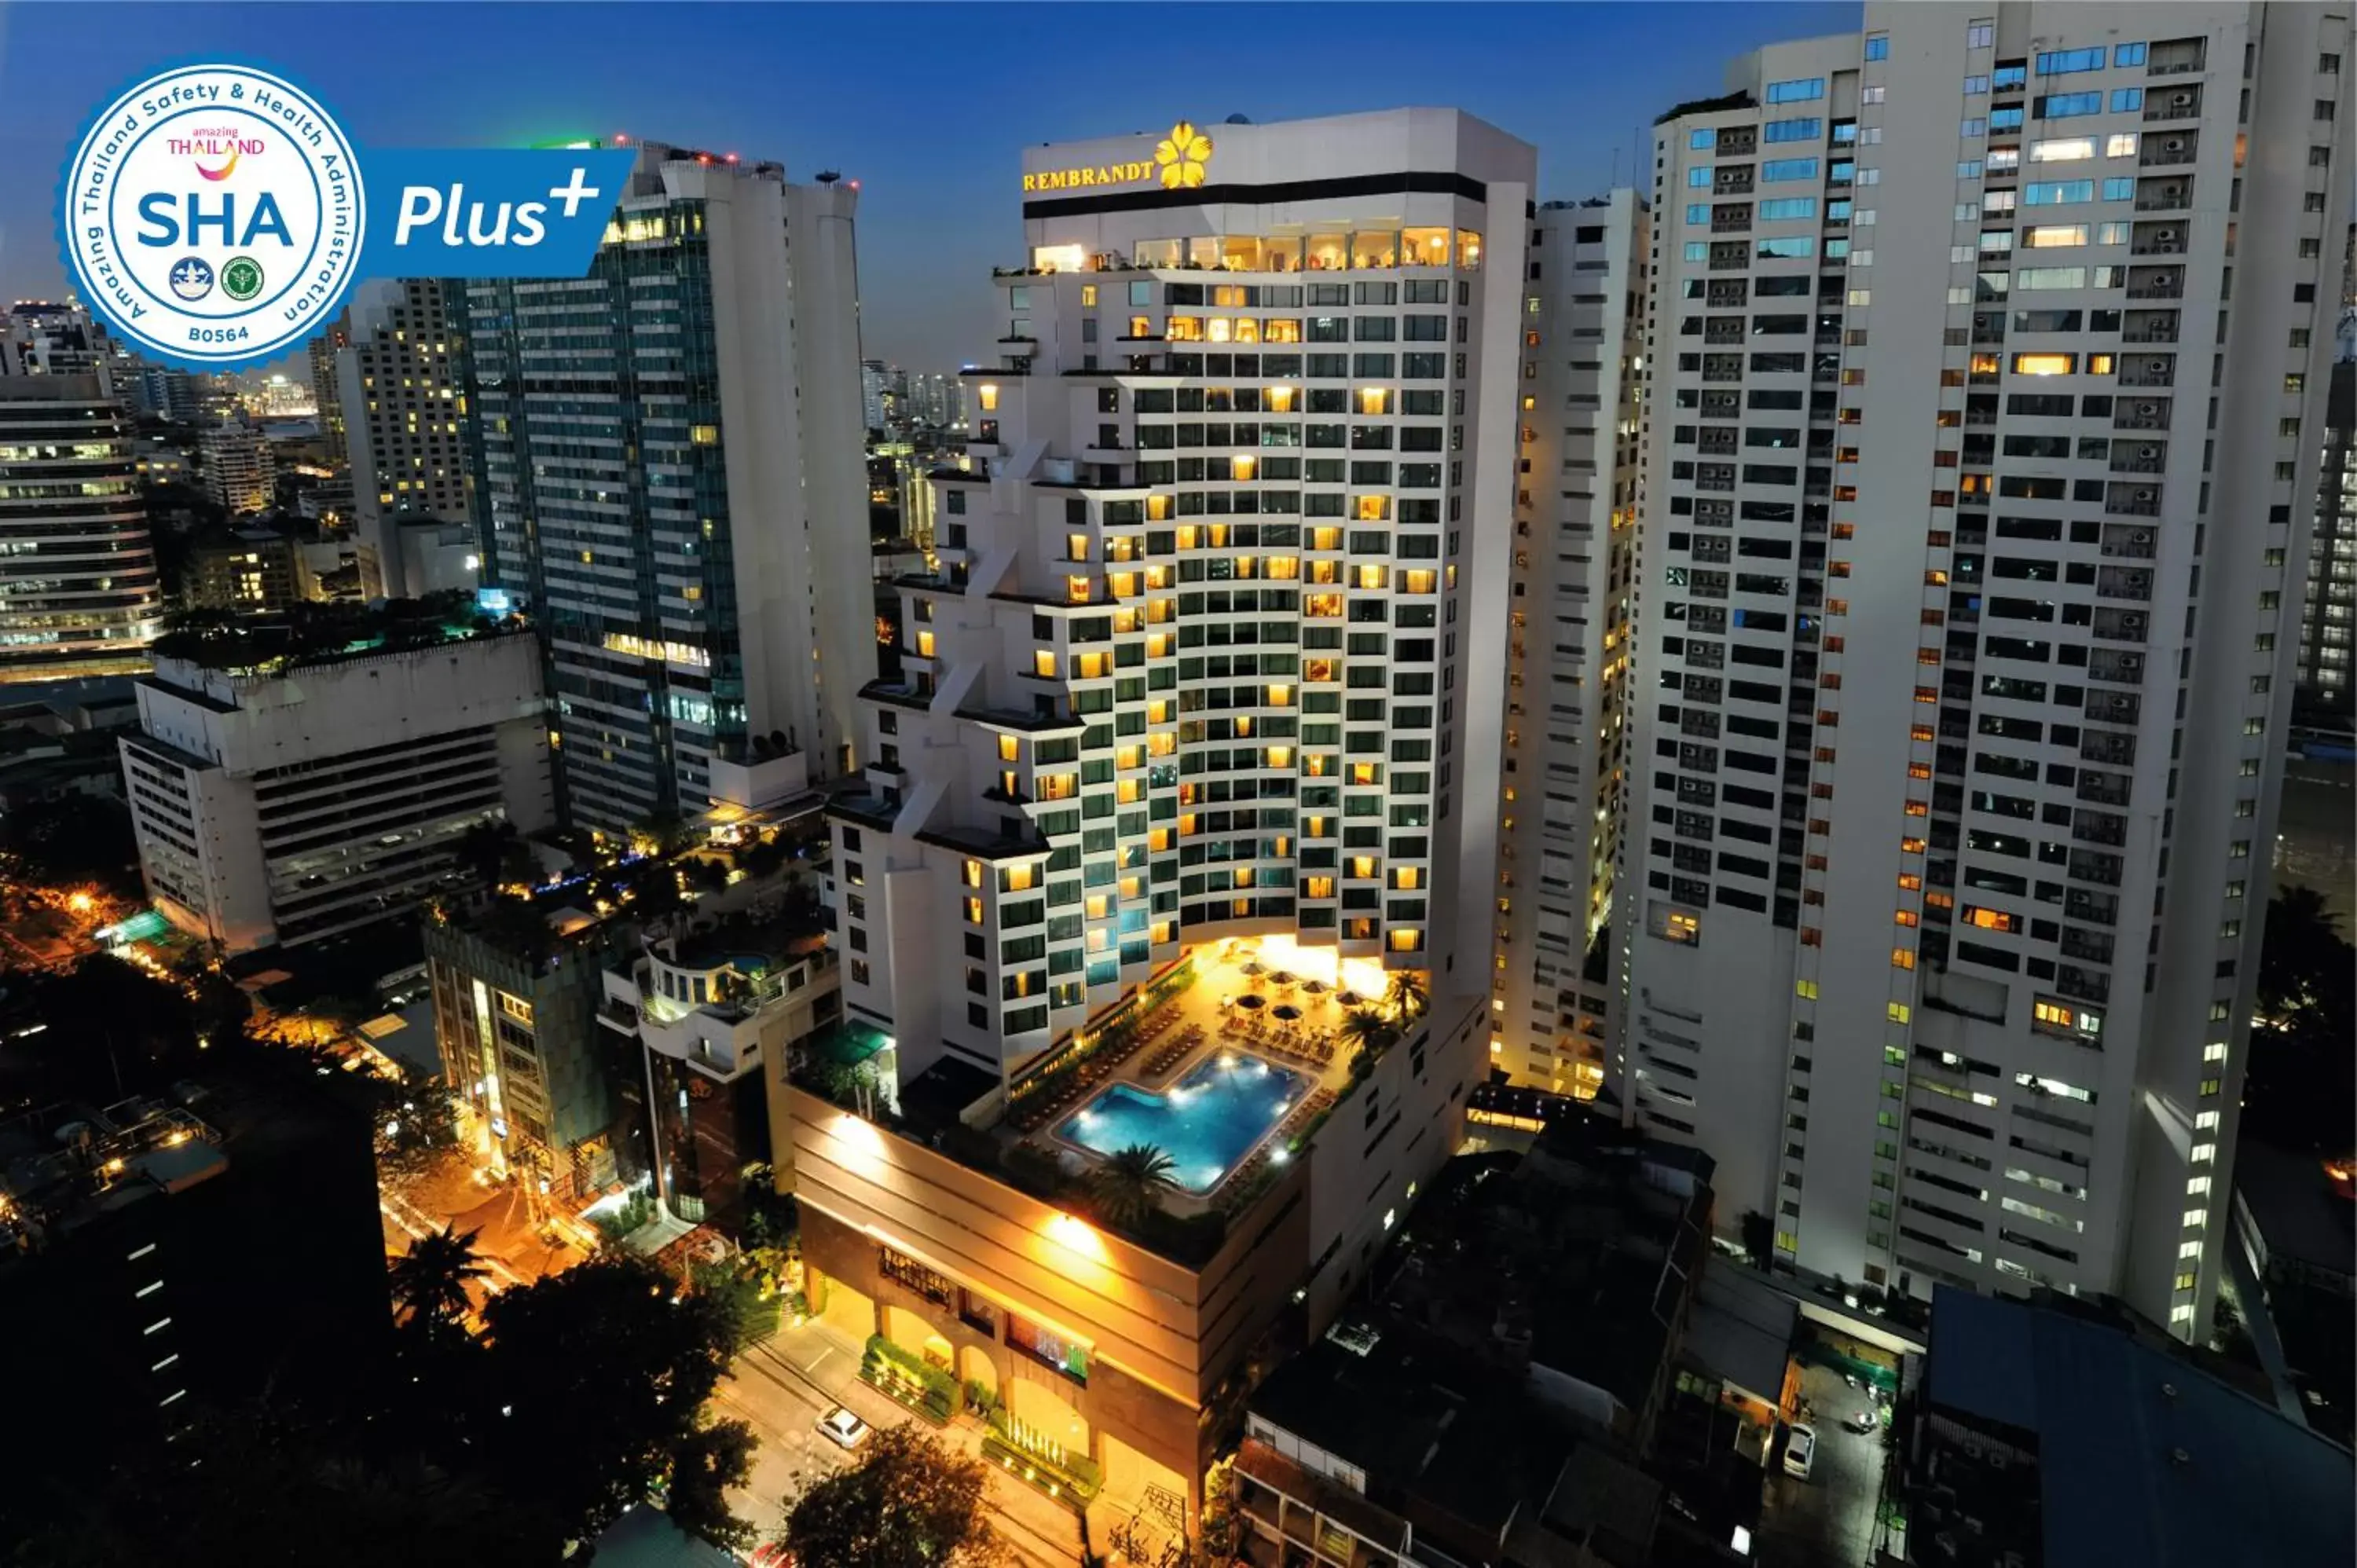 Property building, Bird's-eye View in Rembrandt Hotel and Suites SHA Plus Certified